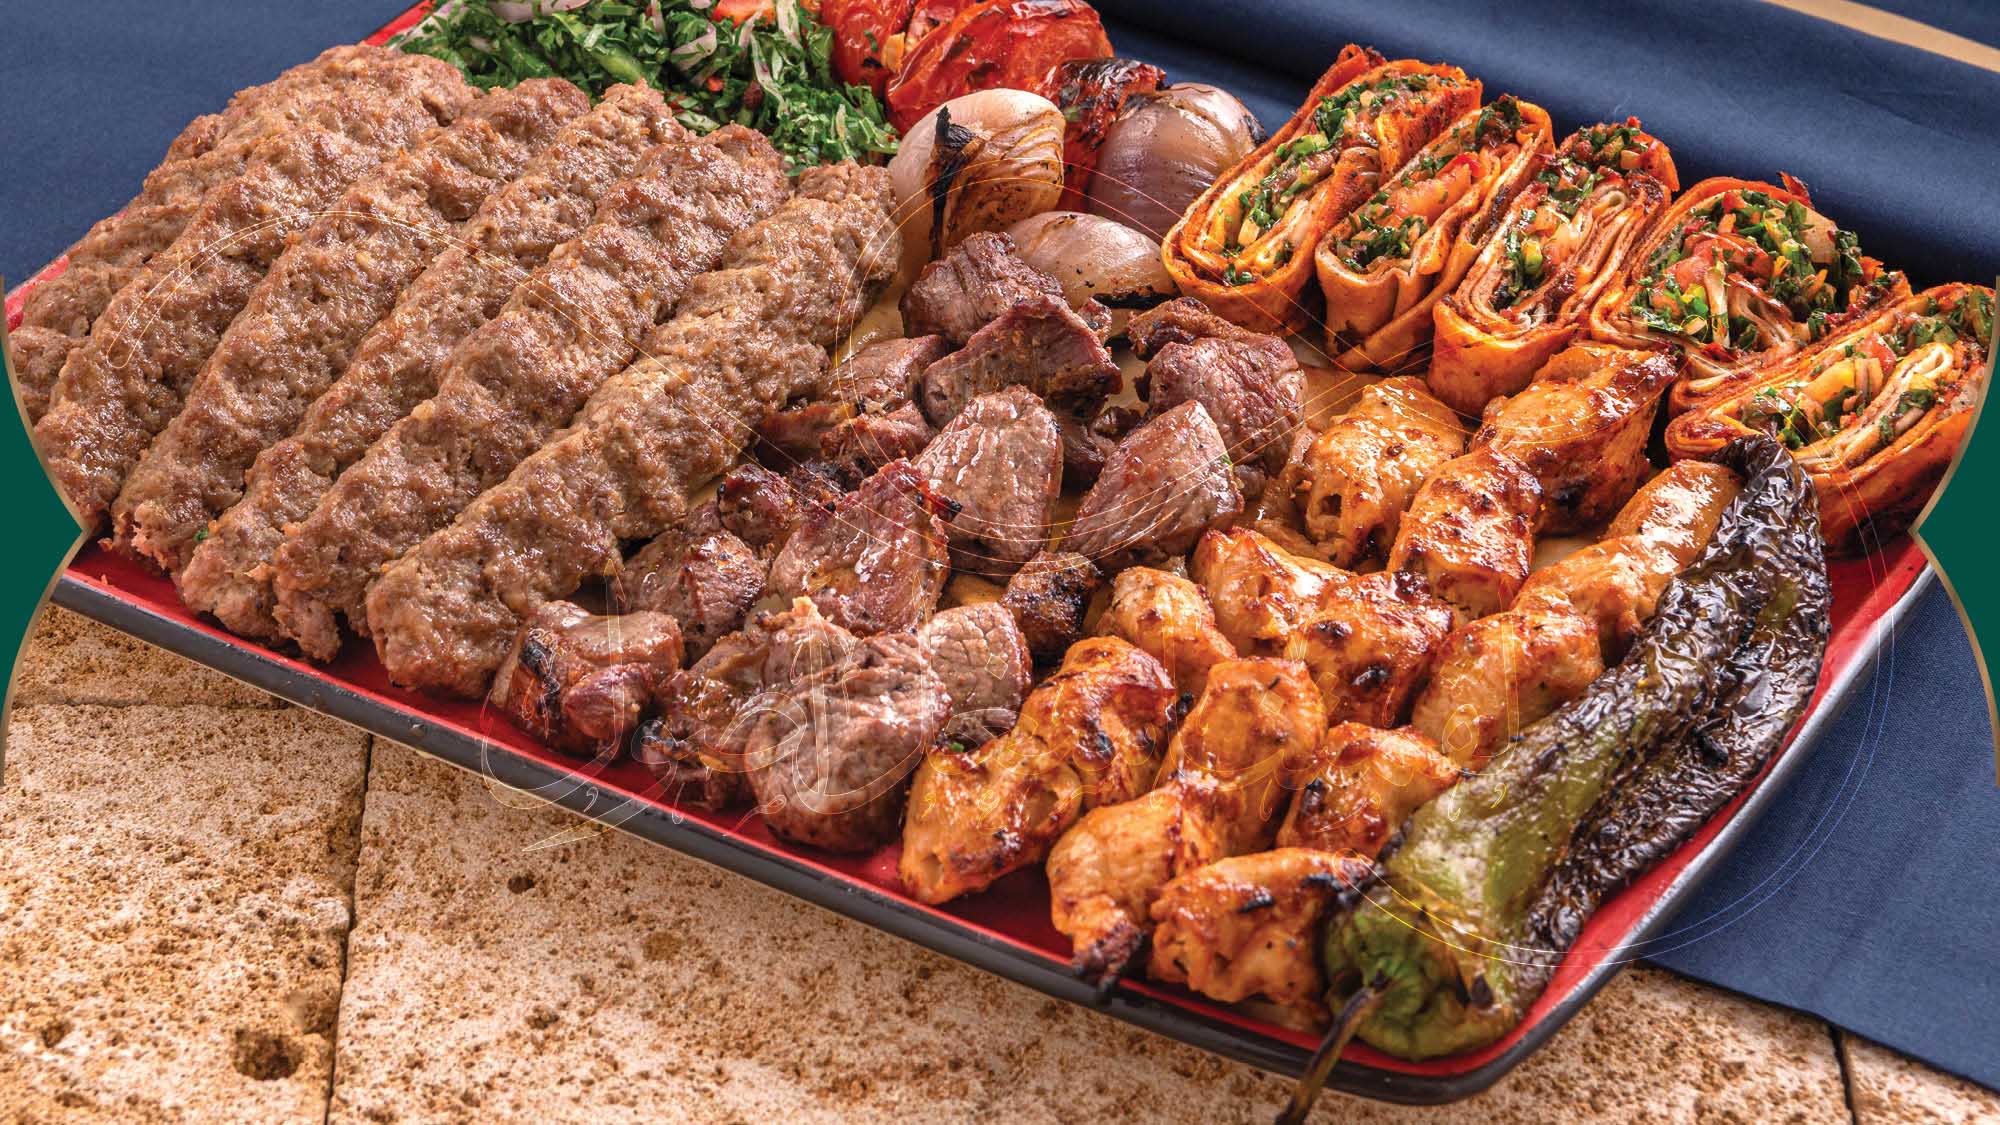 Where Every Meal Turns into an Experience: Top Grills Restaurant in Dubai, Al Barsha